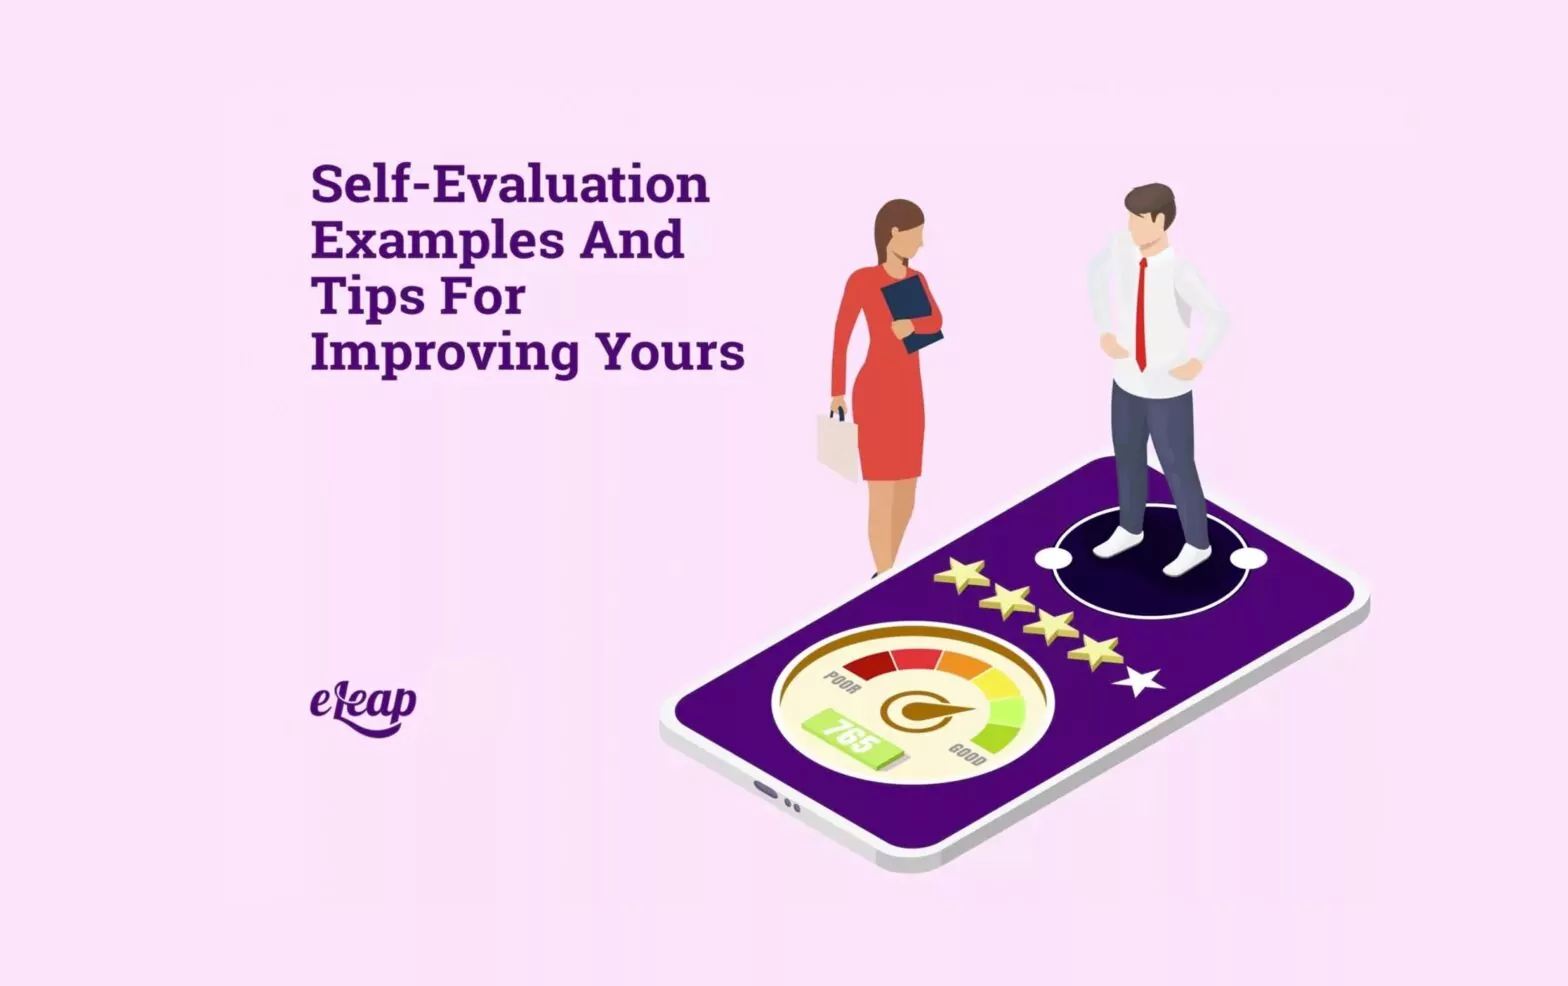 Self-Evaluation Examples and Tips for Improving Yours